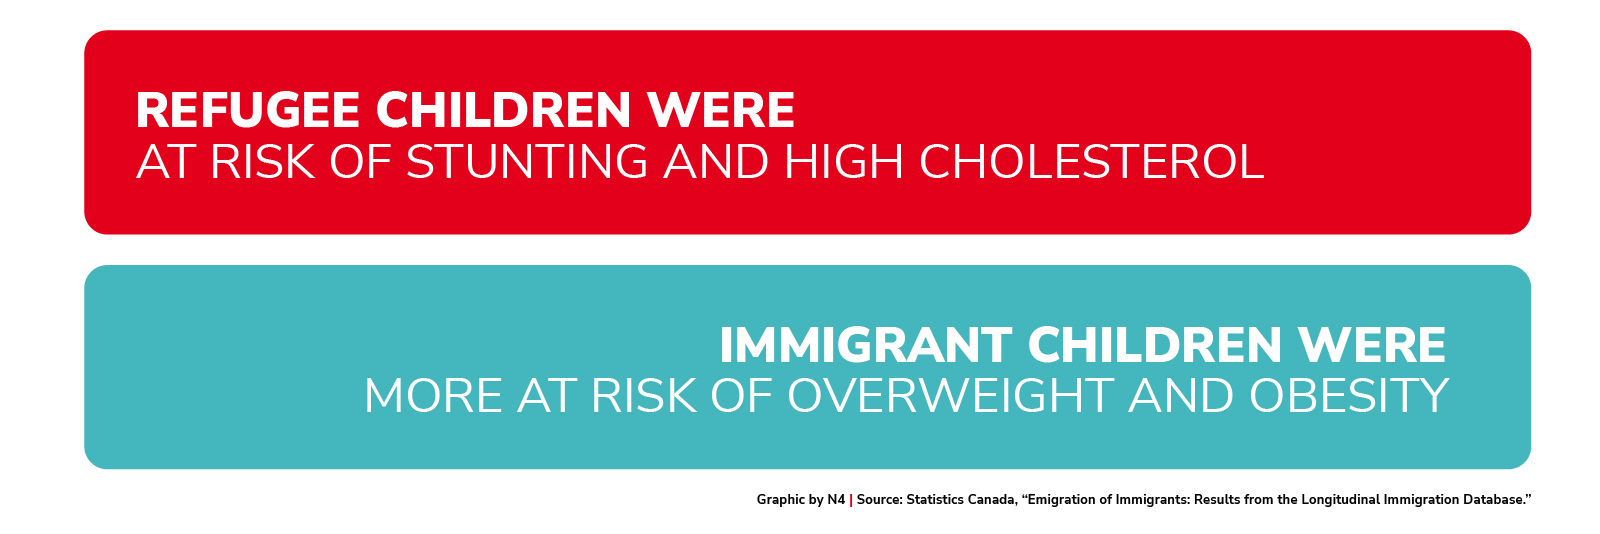 Health disparities between refugee and immigrant children and youth